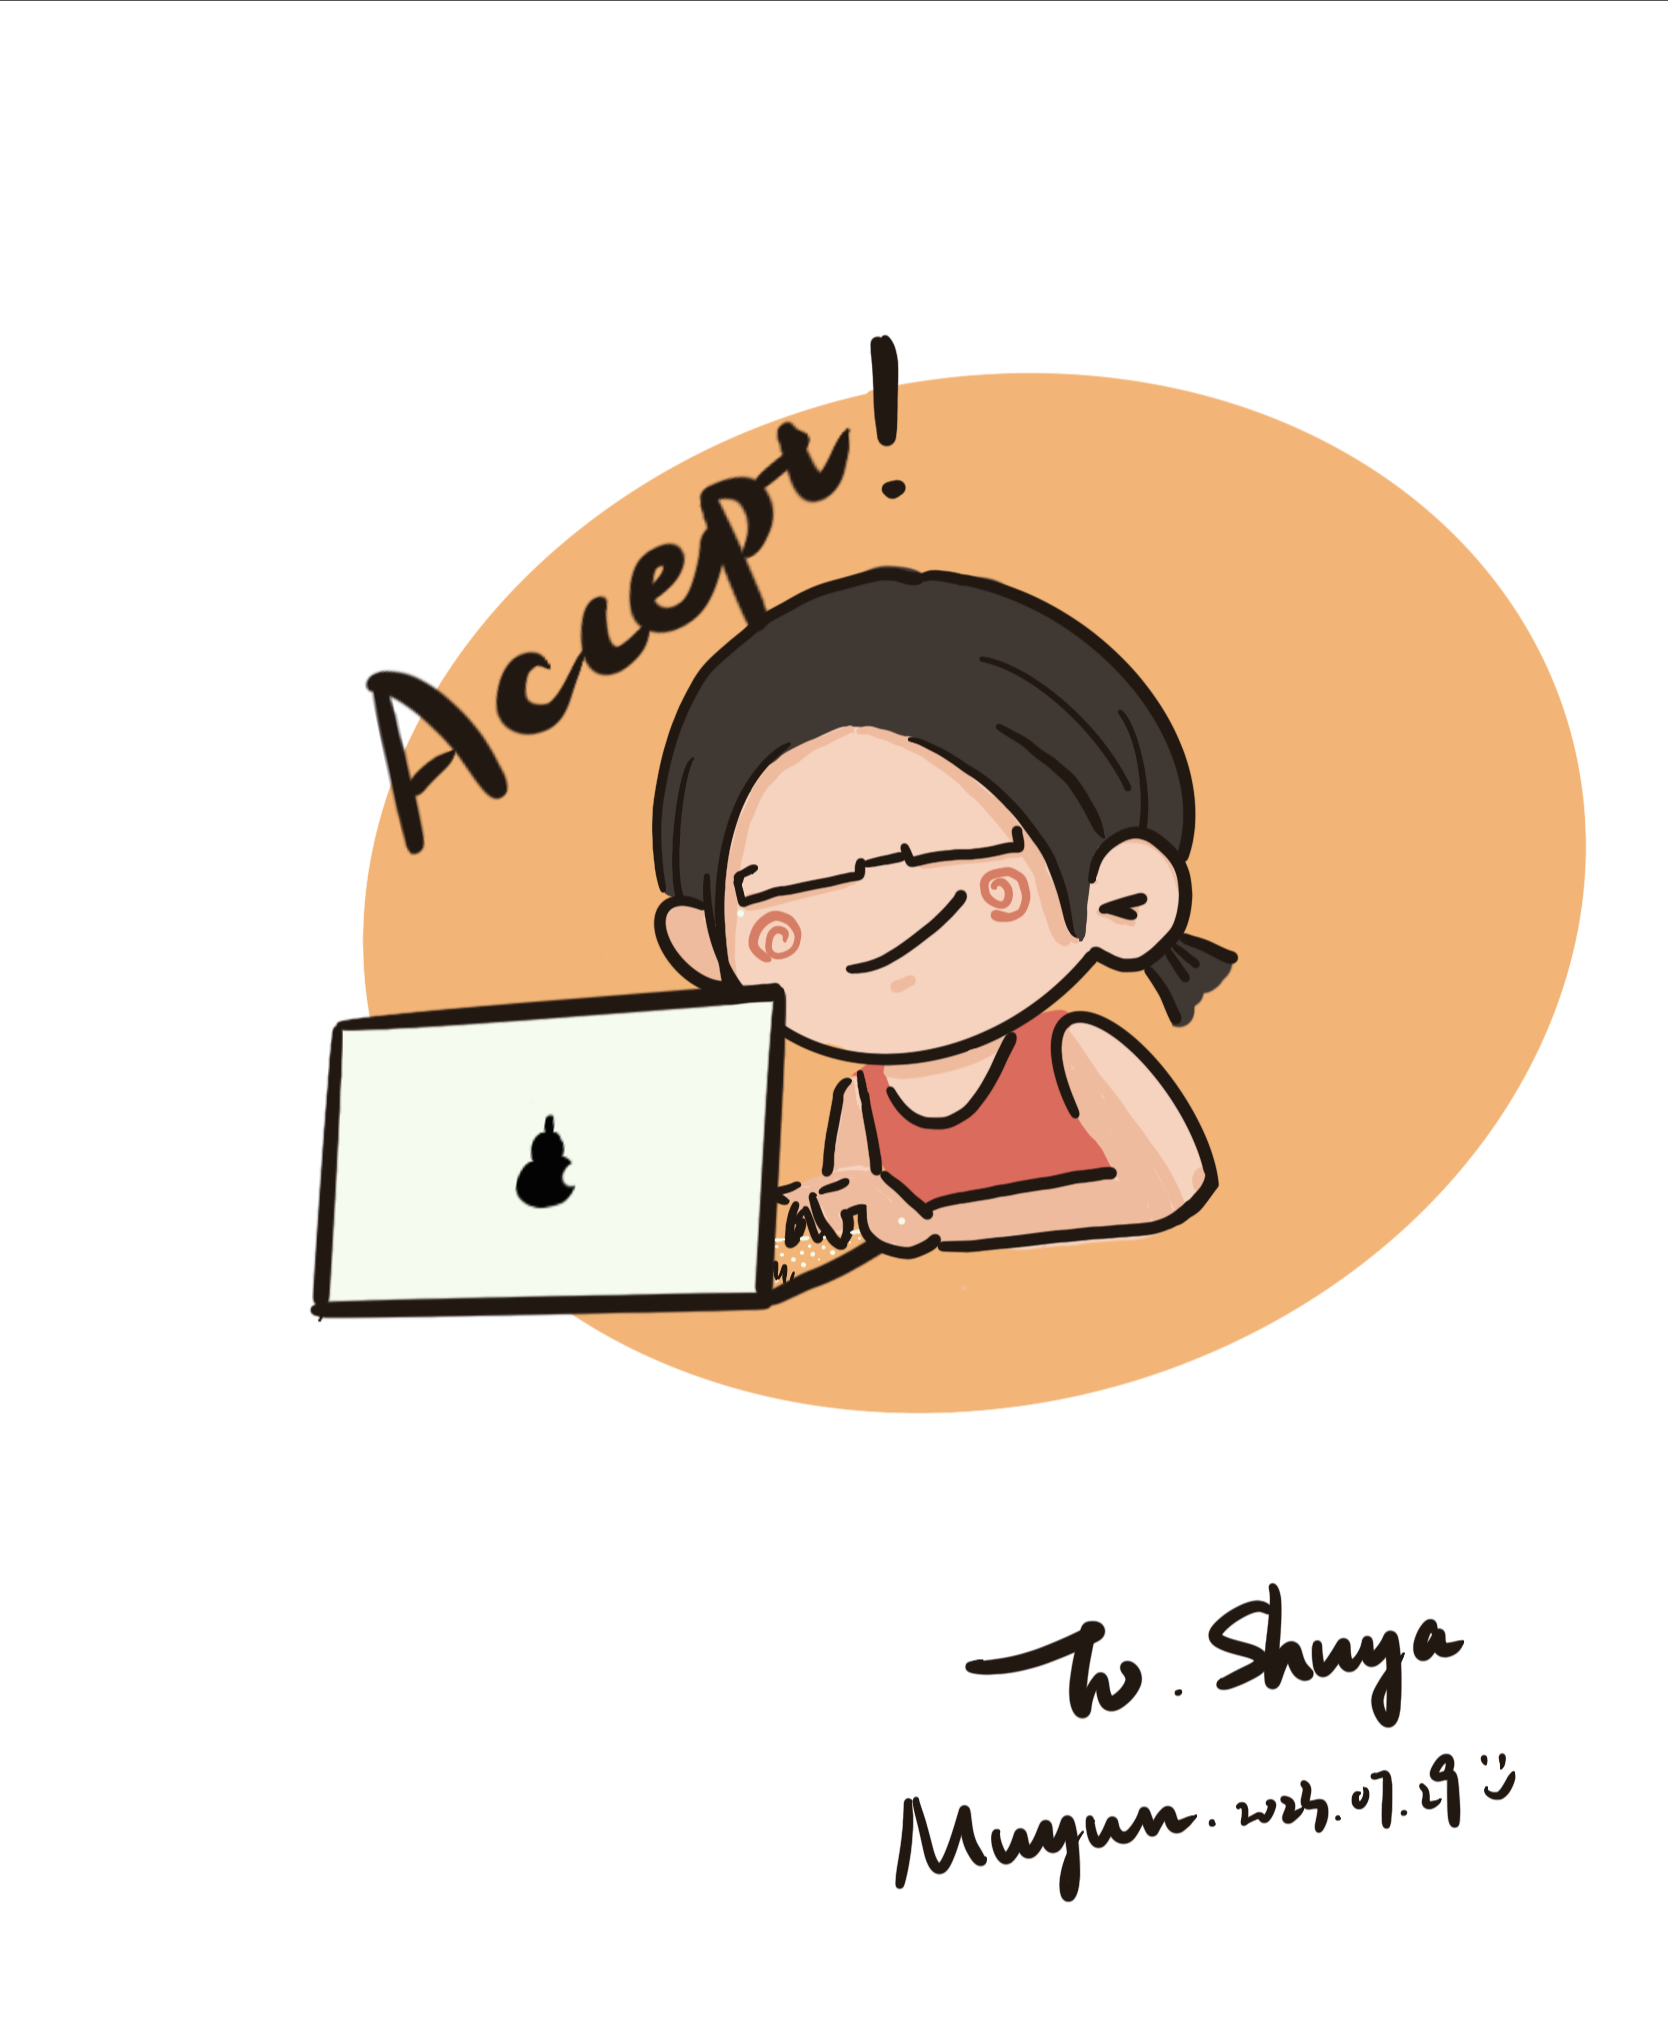 A simple illustration of Shuya submitting a paper for publication. Her eyes are closed and she has a slight smile while sitting at her laptop. There is an orange circle in the background, and black lettering reads "Accept!" above her head.